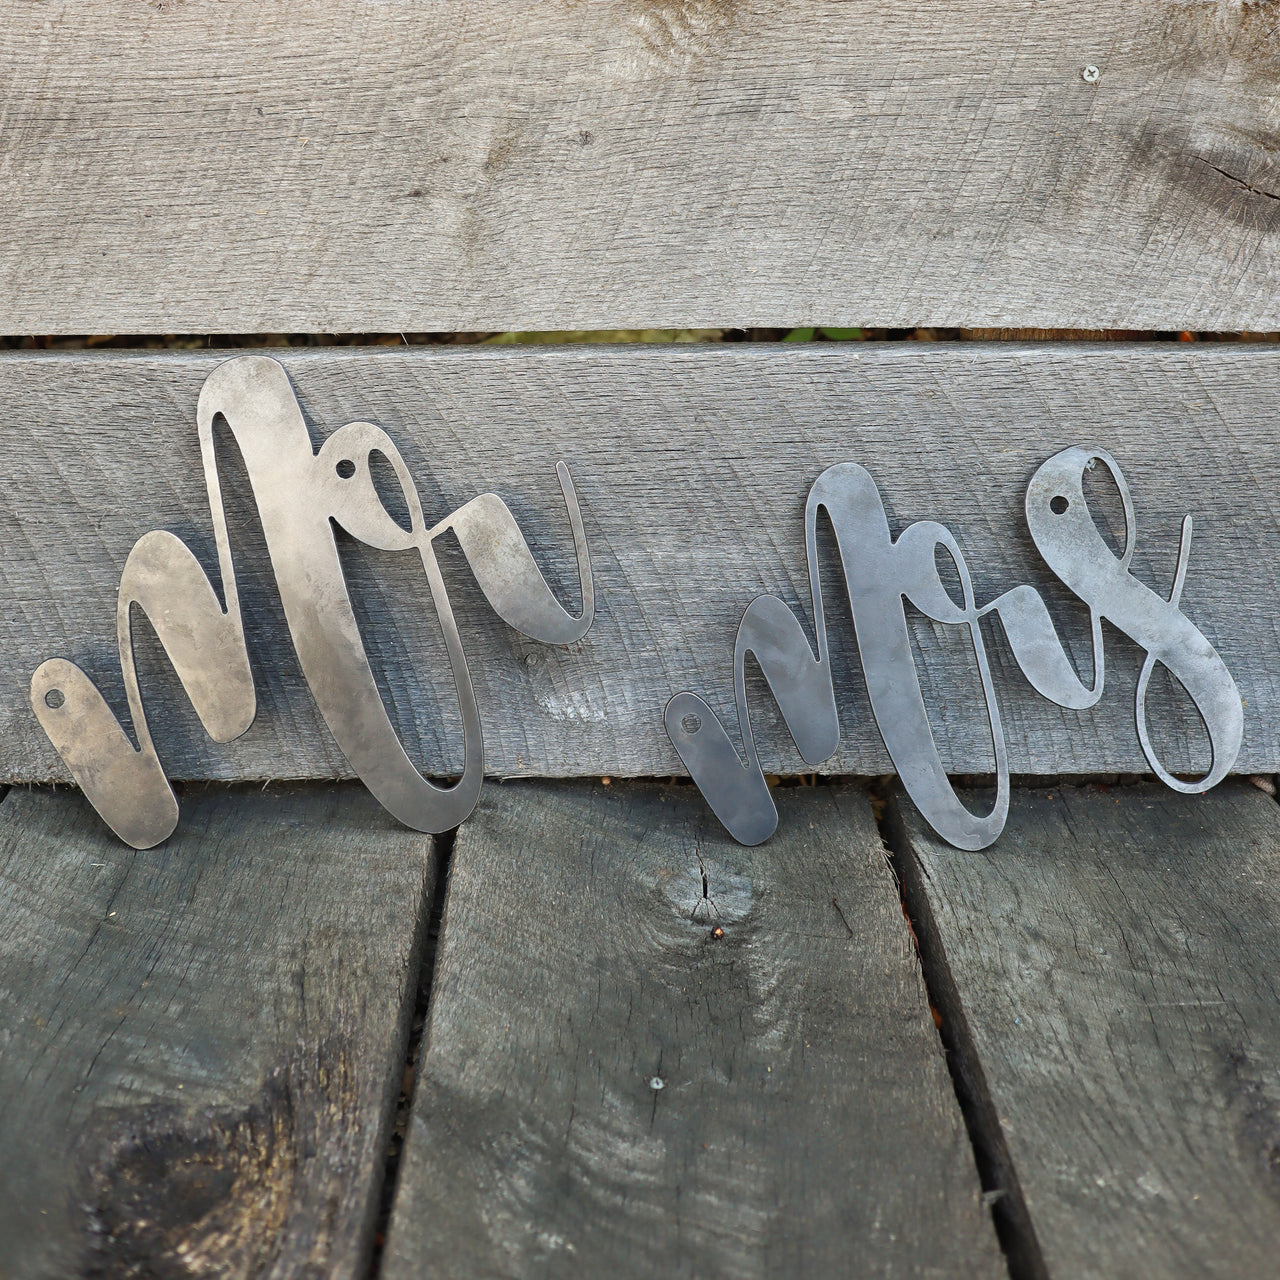 Mr and Mrs Wedding Chair Signs - Metal Chair Back Decorations - Bride and Groom Decor